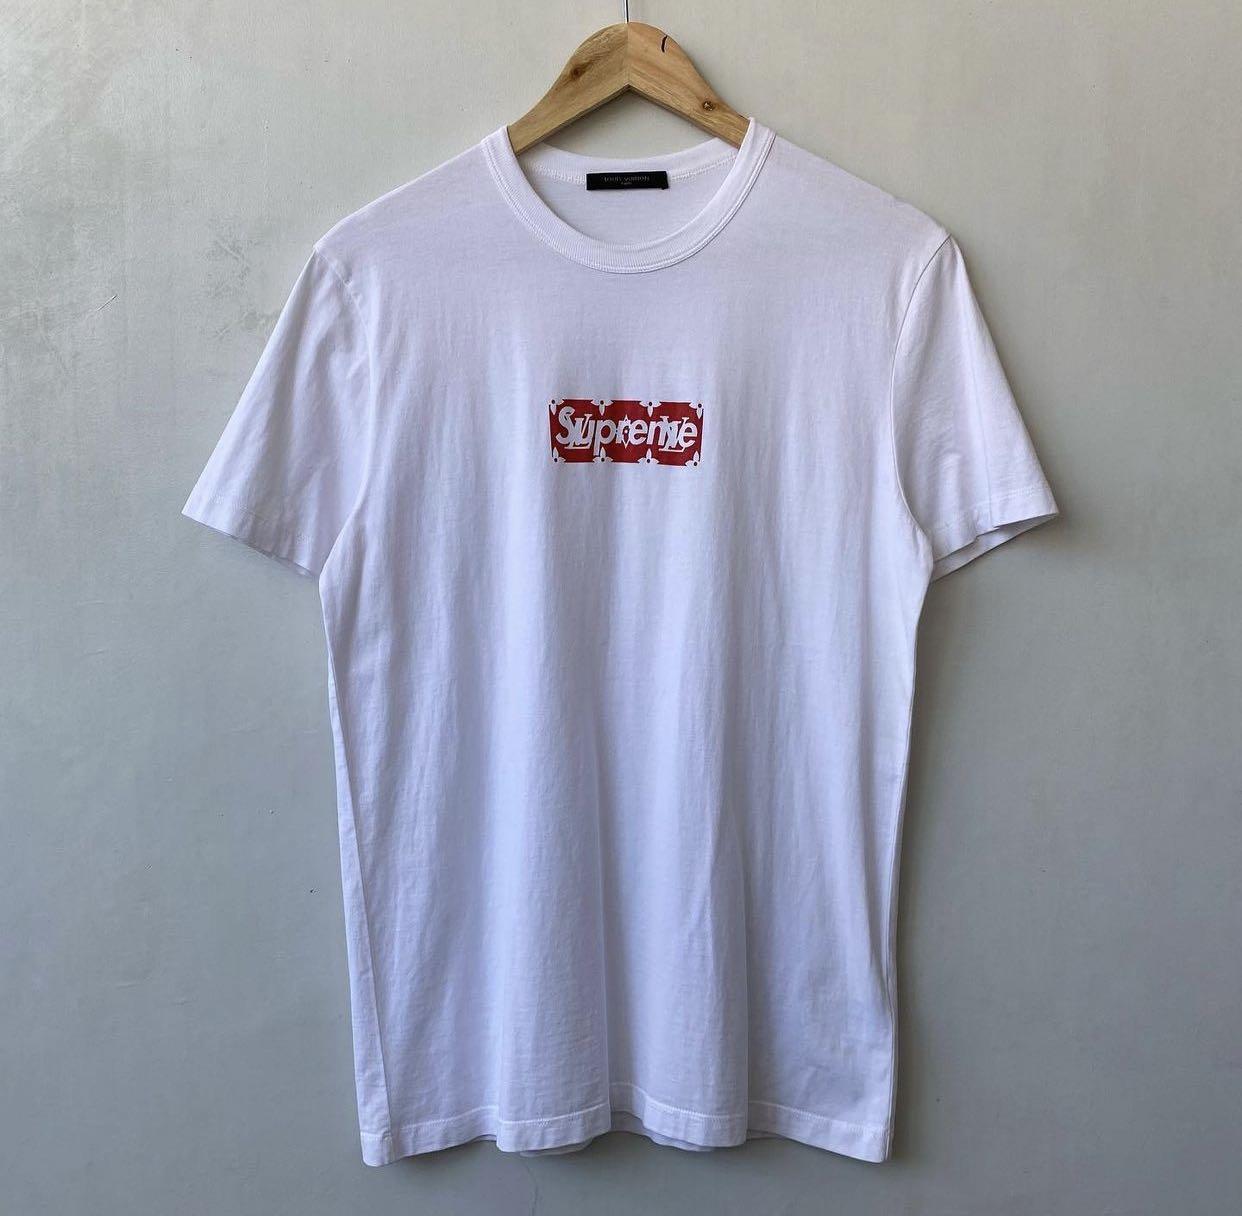 Louis Vuitton X Supreme Box Logo Tee  Size M Available For Immediate Sale  At Sothebys